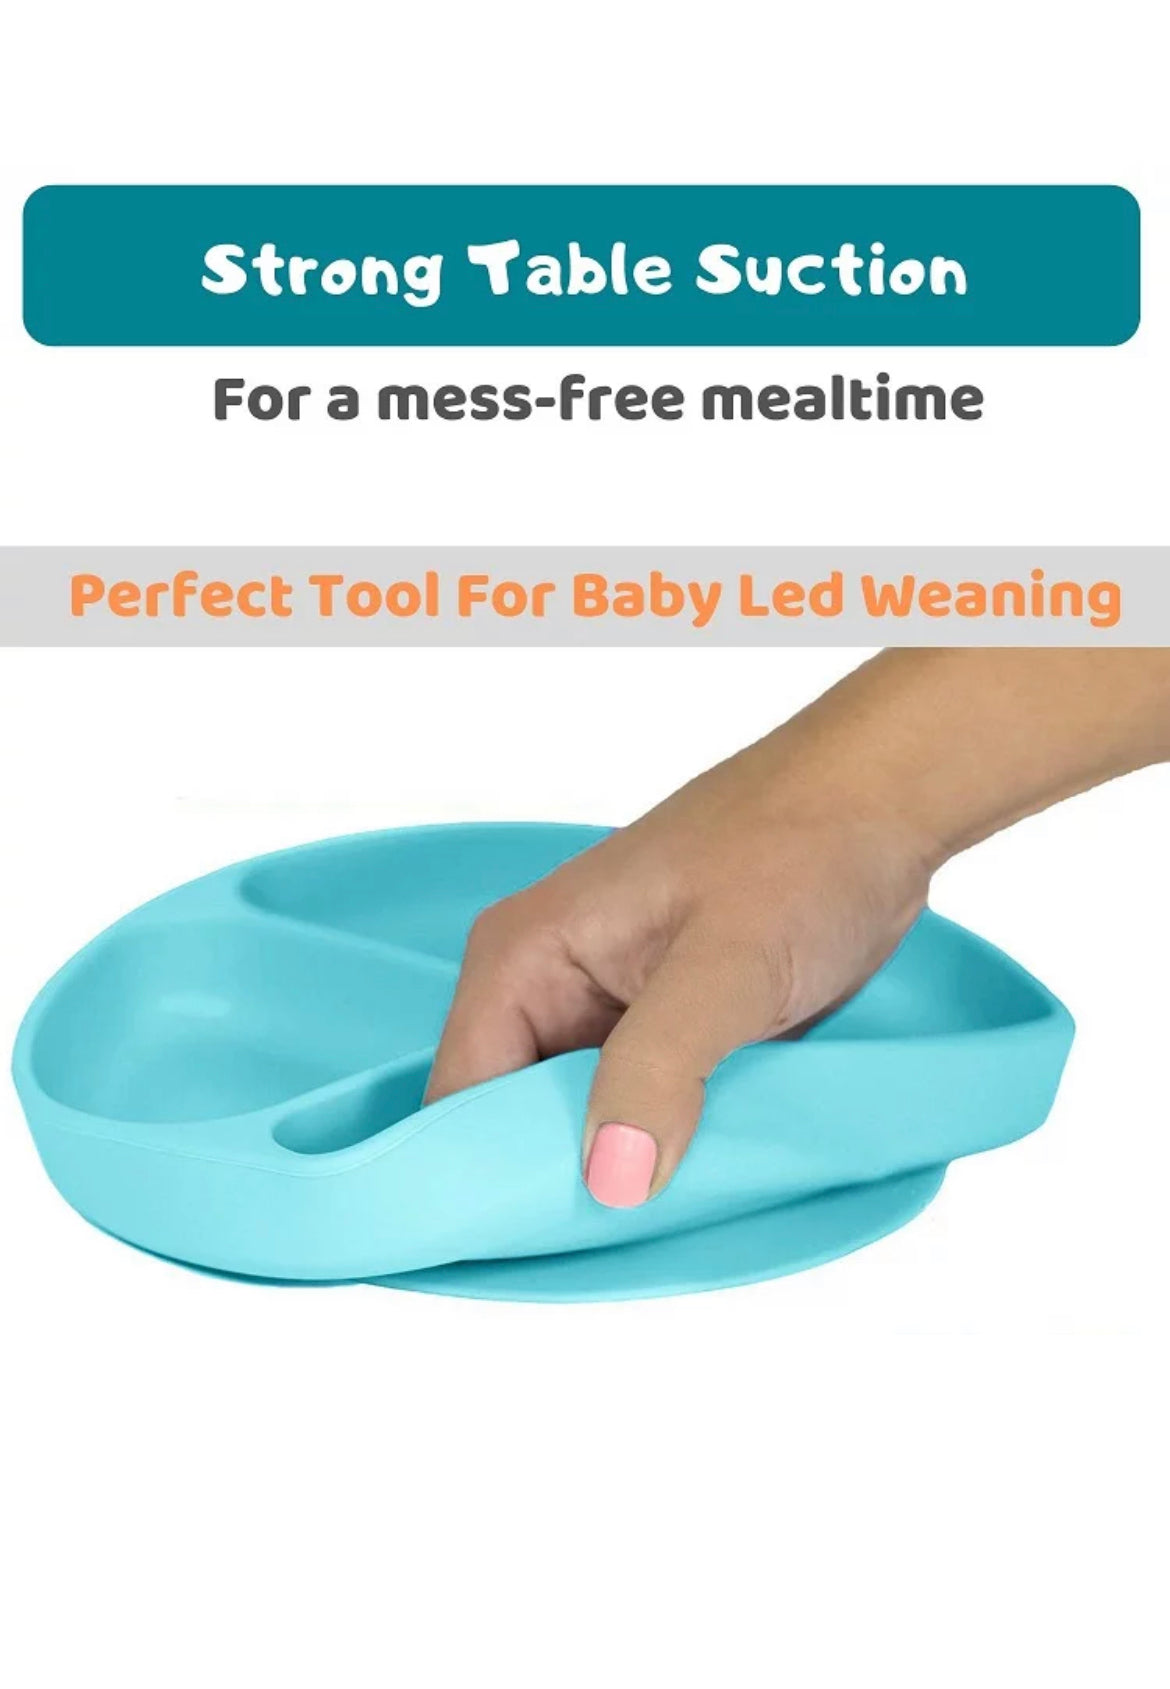 Suction Plate for Toddlers.